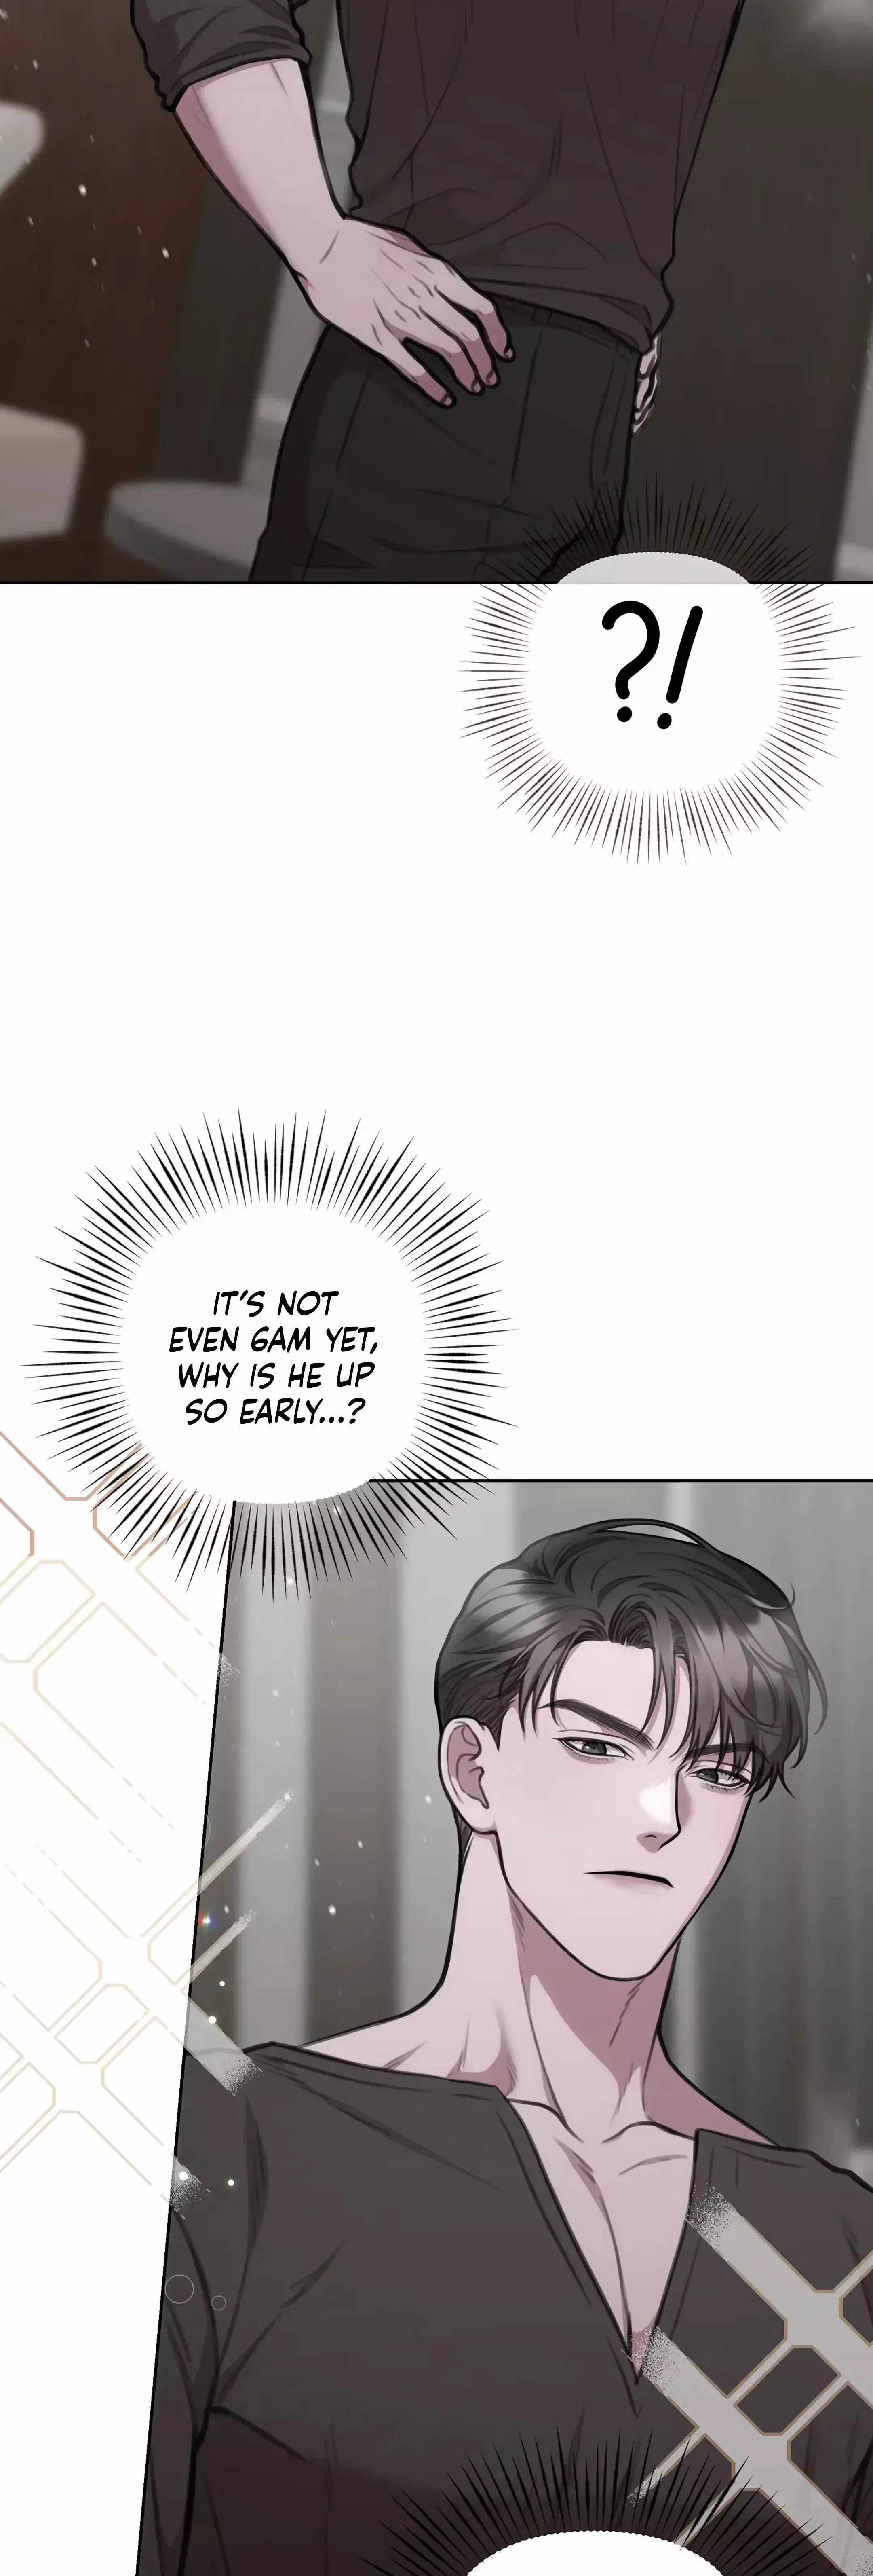 Secretary Jin's Confinement Diary - 24 page 15-b24be38c